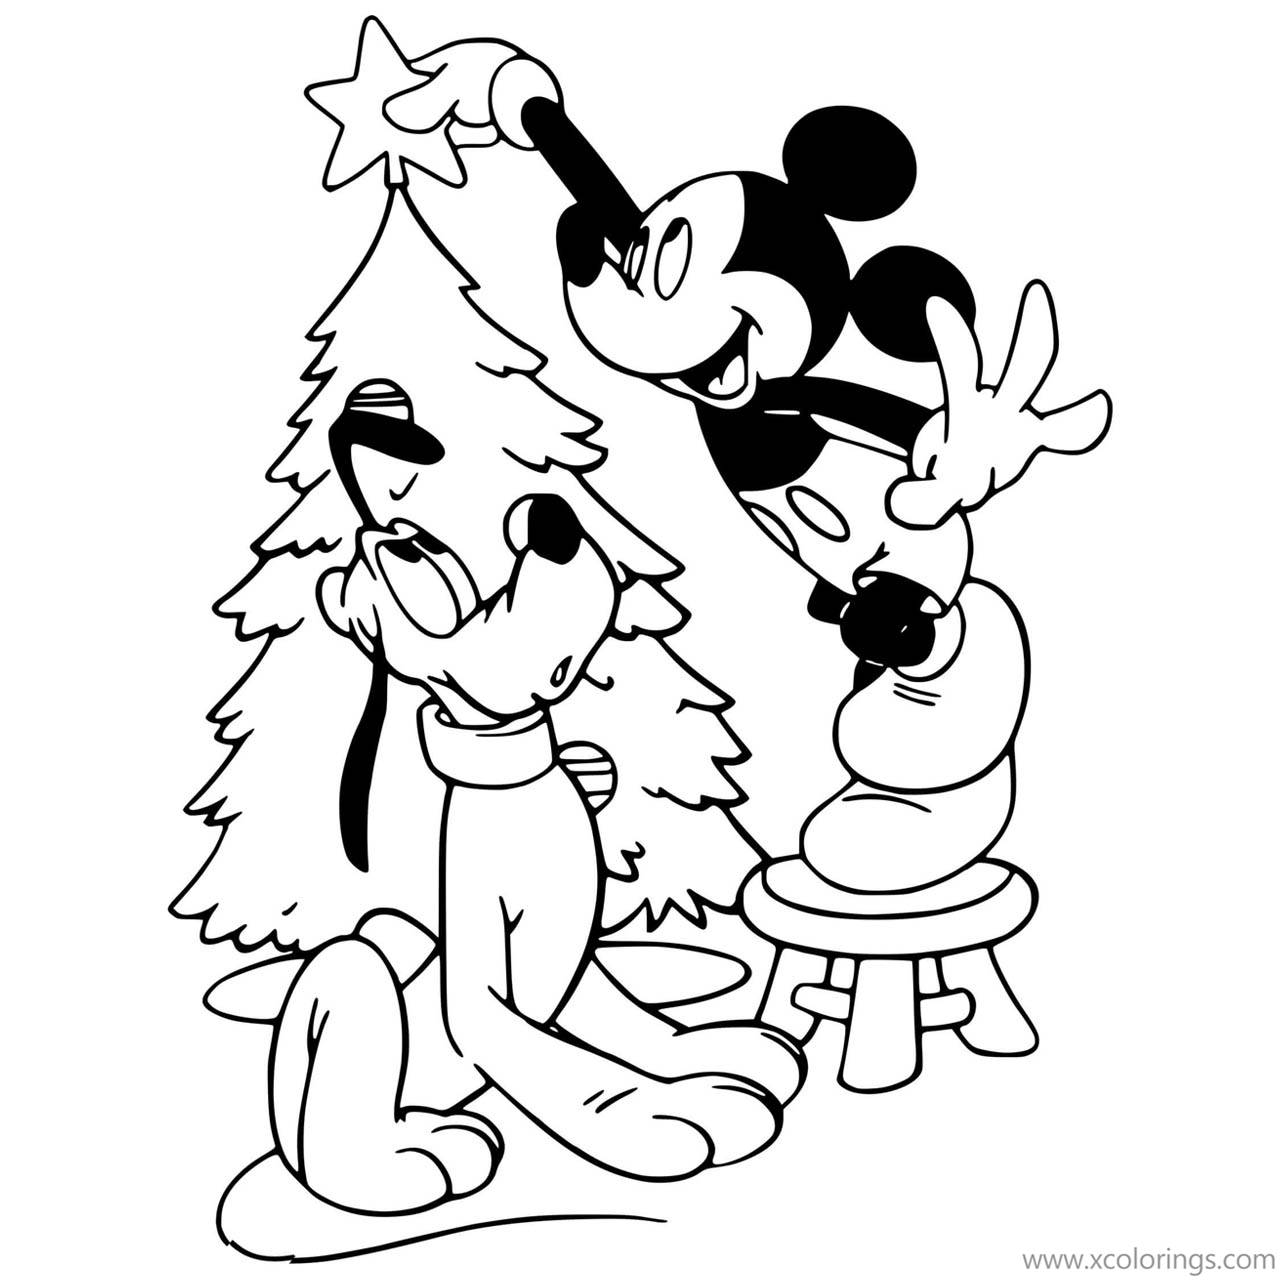 Free Mickey Mouse Christmas Coloring Pages with Pluto printable